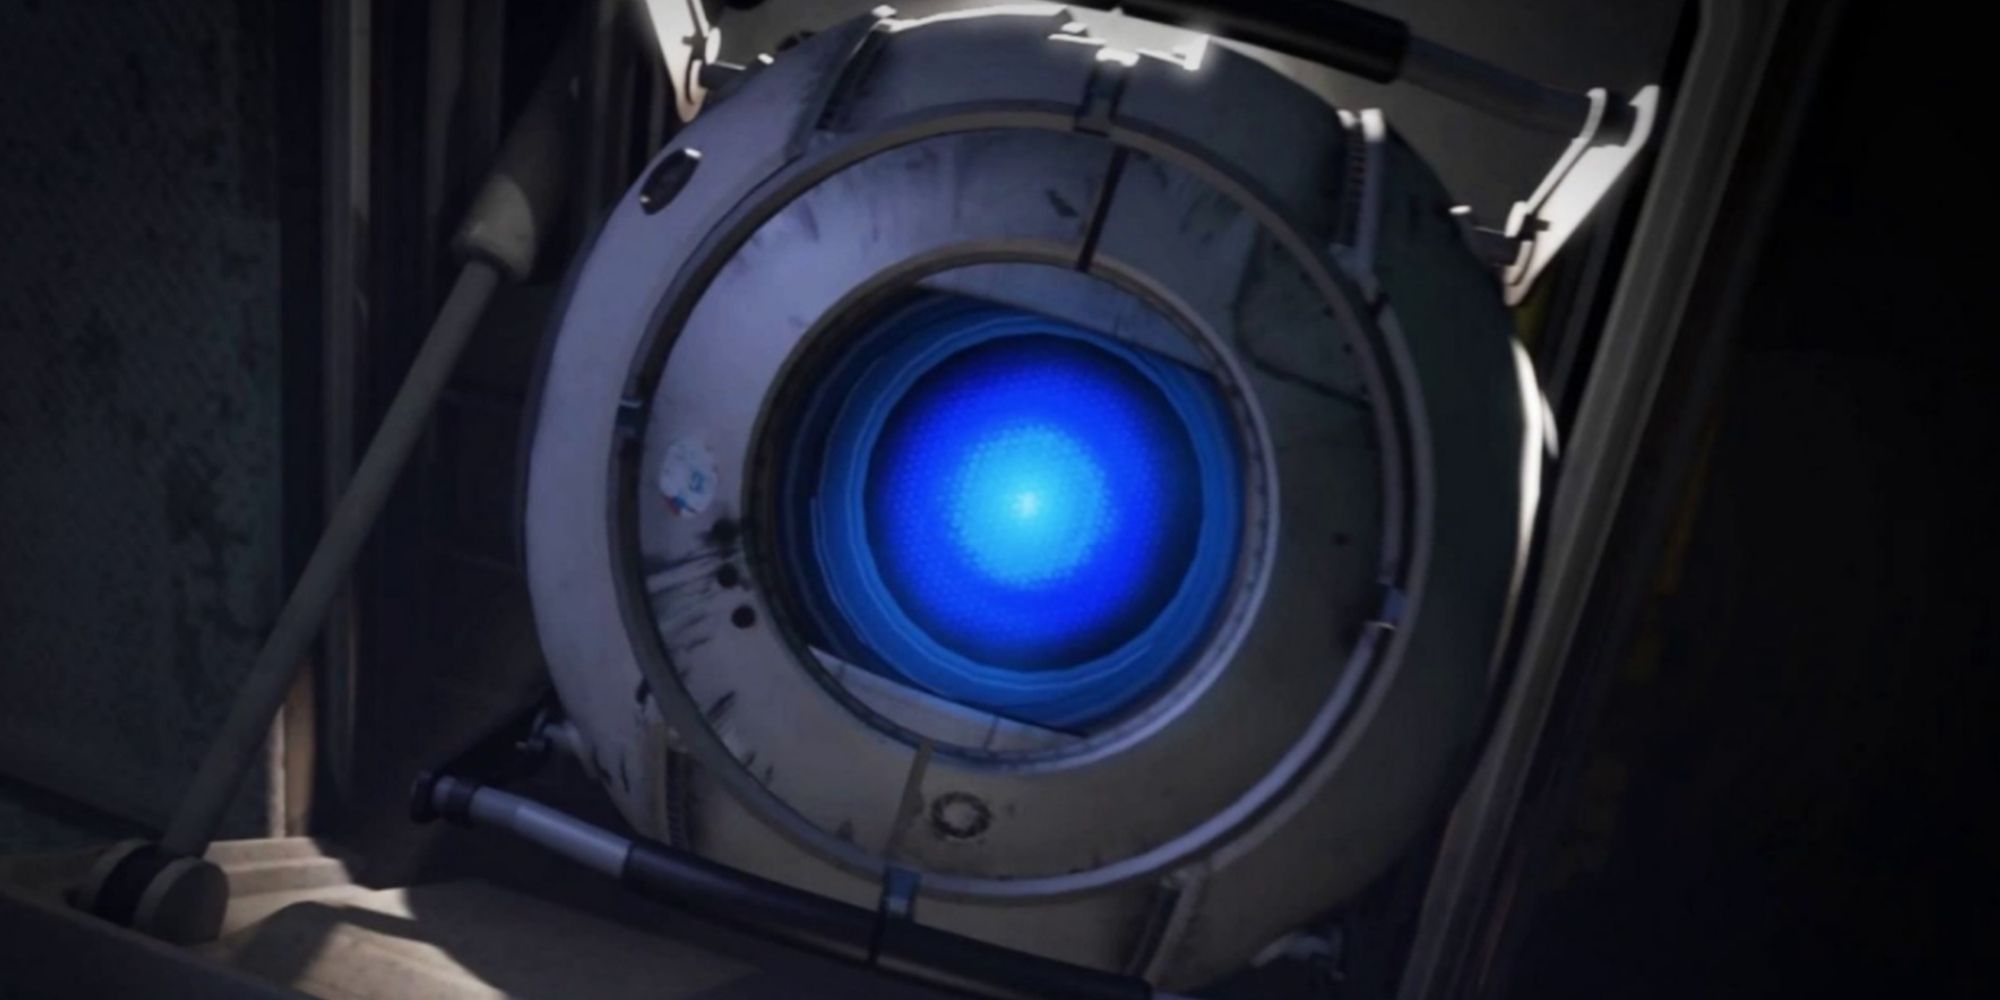 Wheatley the spherical android as seen in Portal 2